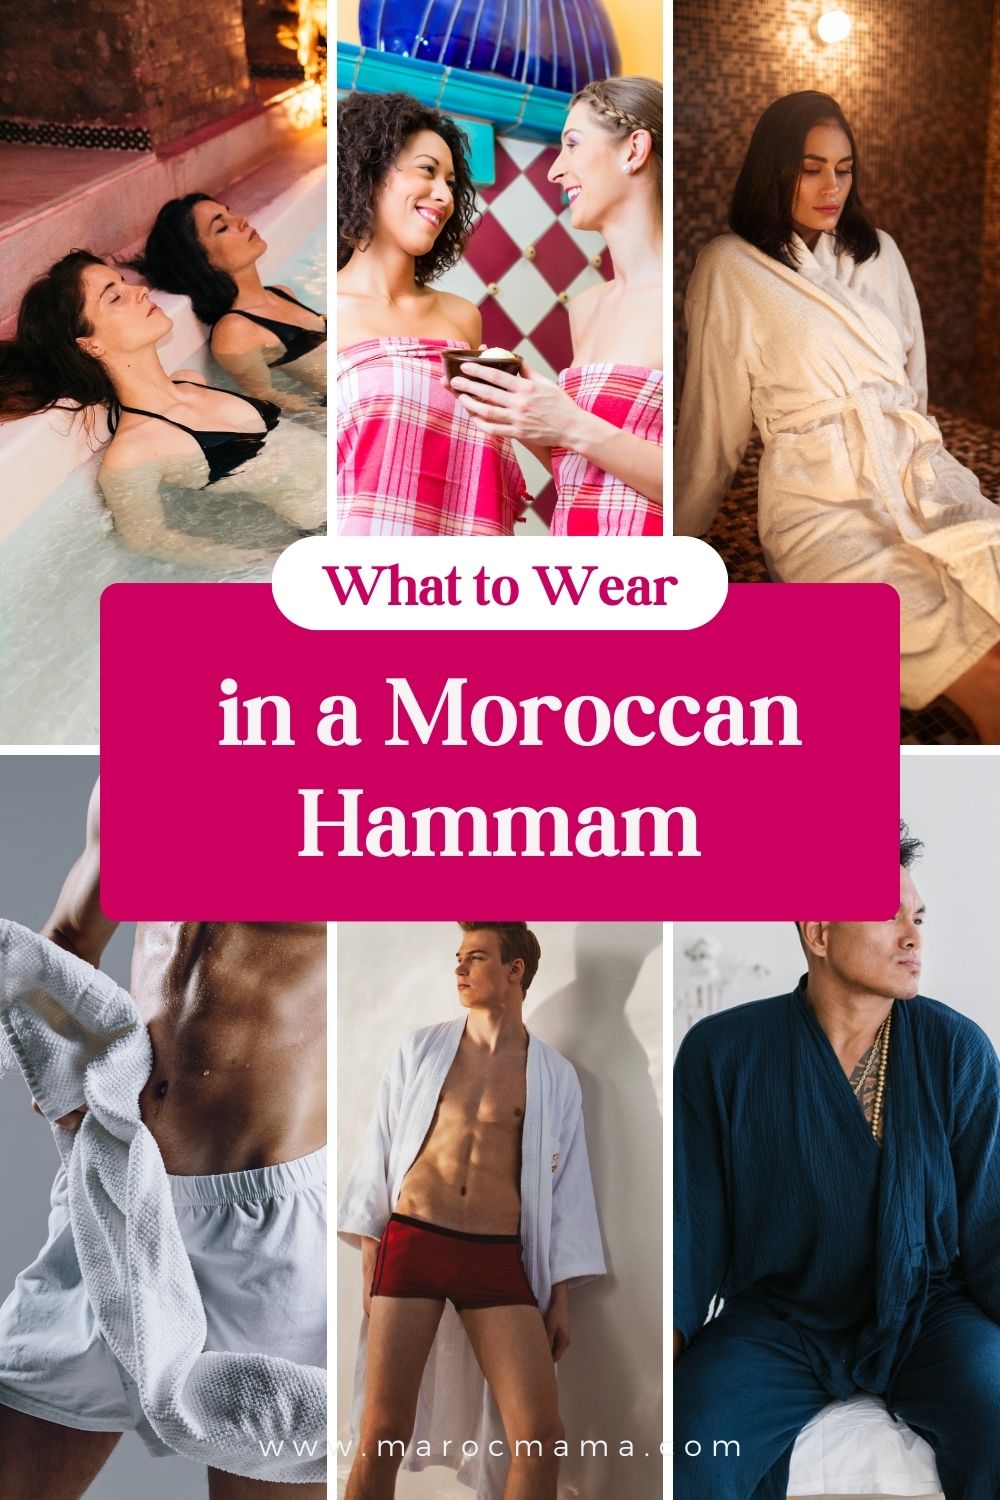 Pictures of men and women wearing attires for Hammam with the text What to Wear in a Moroccan Hammam